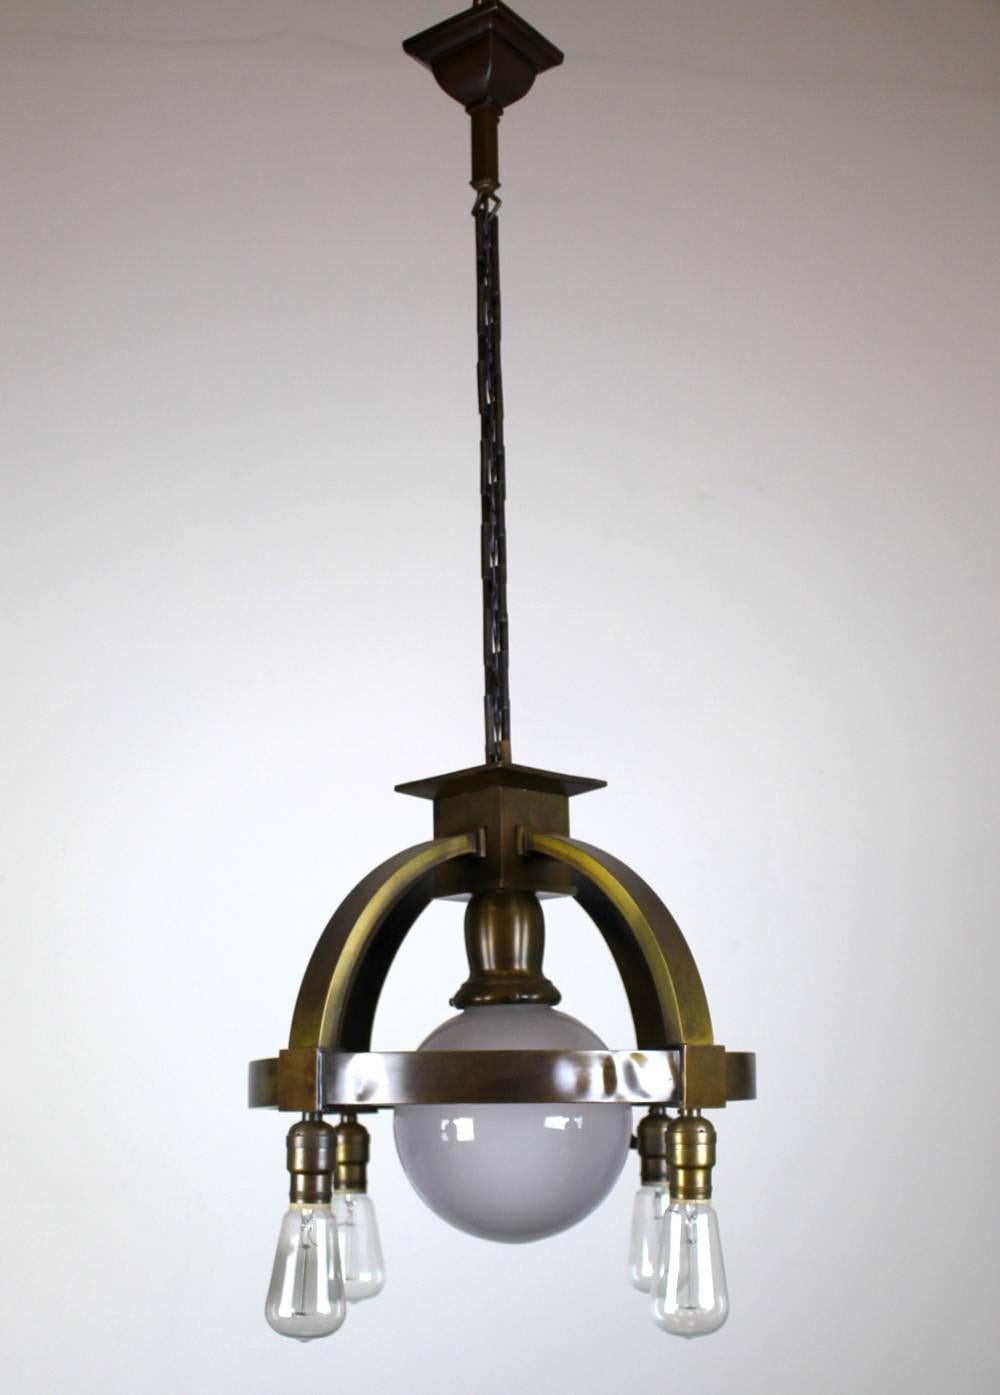 Sturdy Industrial style commercial fixture.

Finished in a dark olive bronze color.

Bare bulbs on the ring increase the Industrial aspects of this light, softened down by the centre glass globe shade.

Some historic creasing to ring (visible